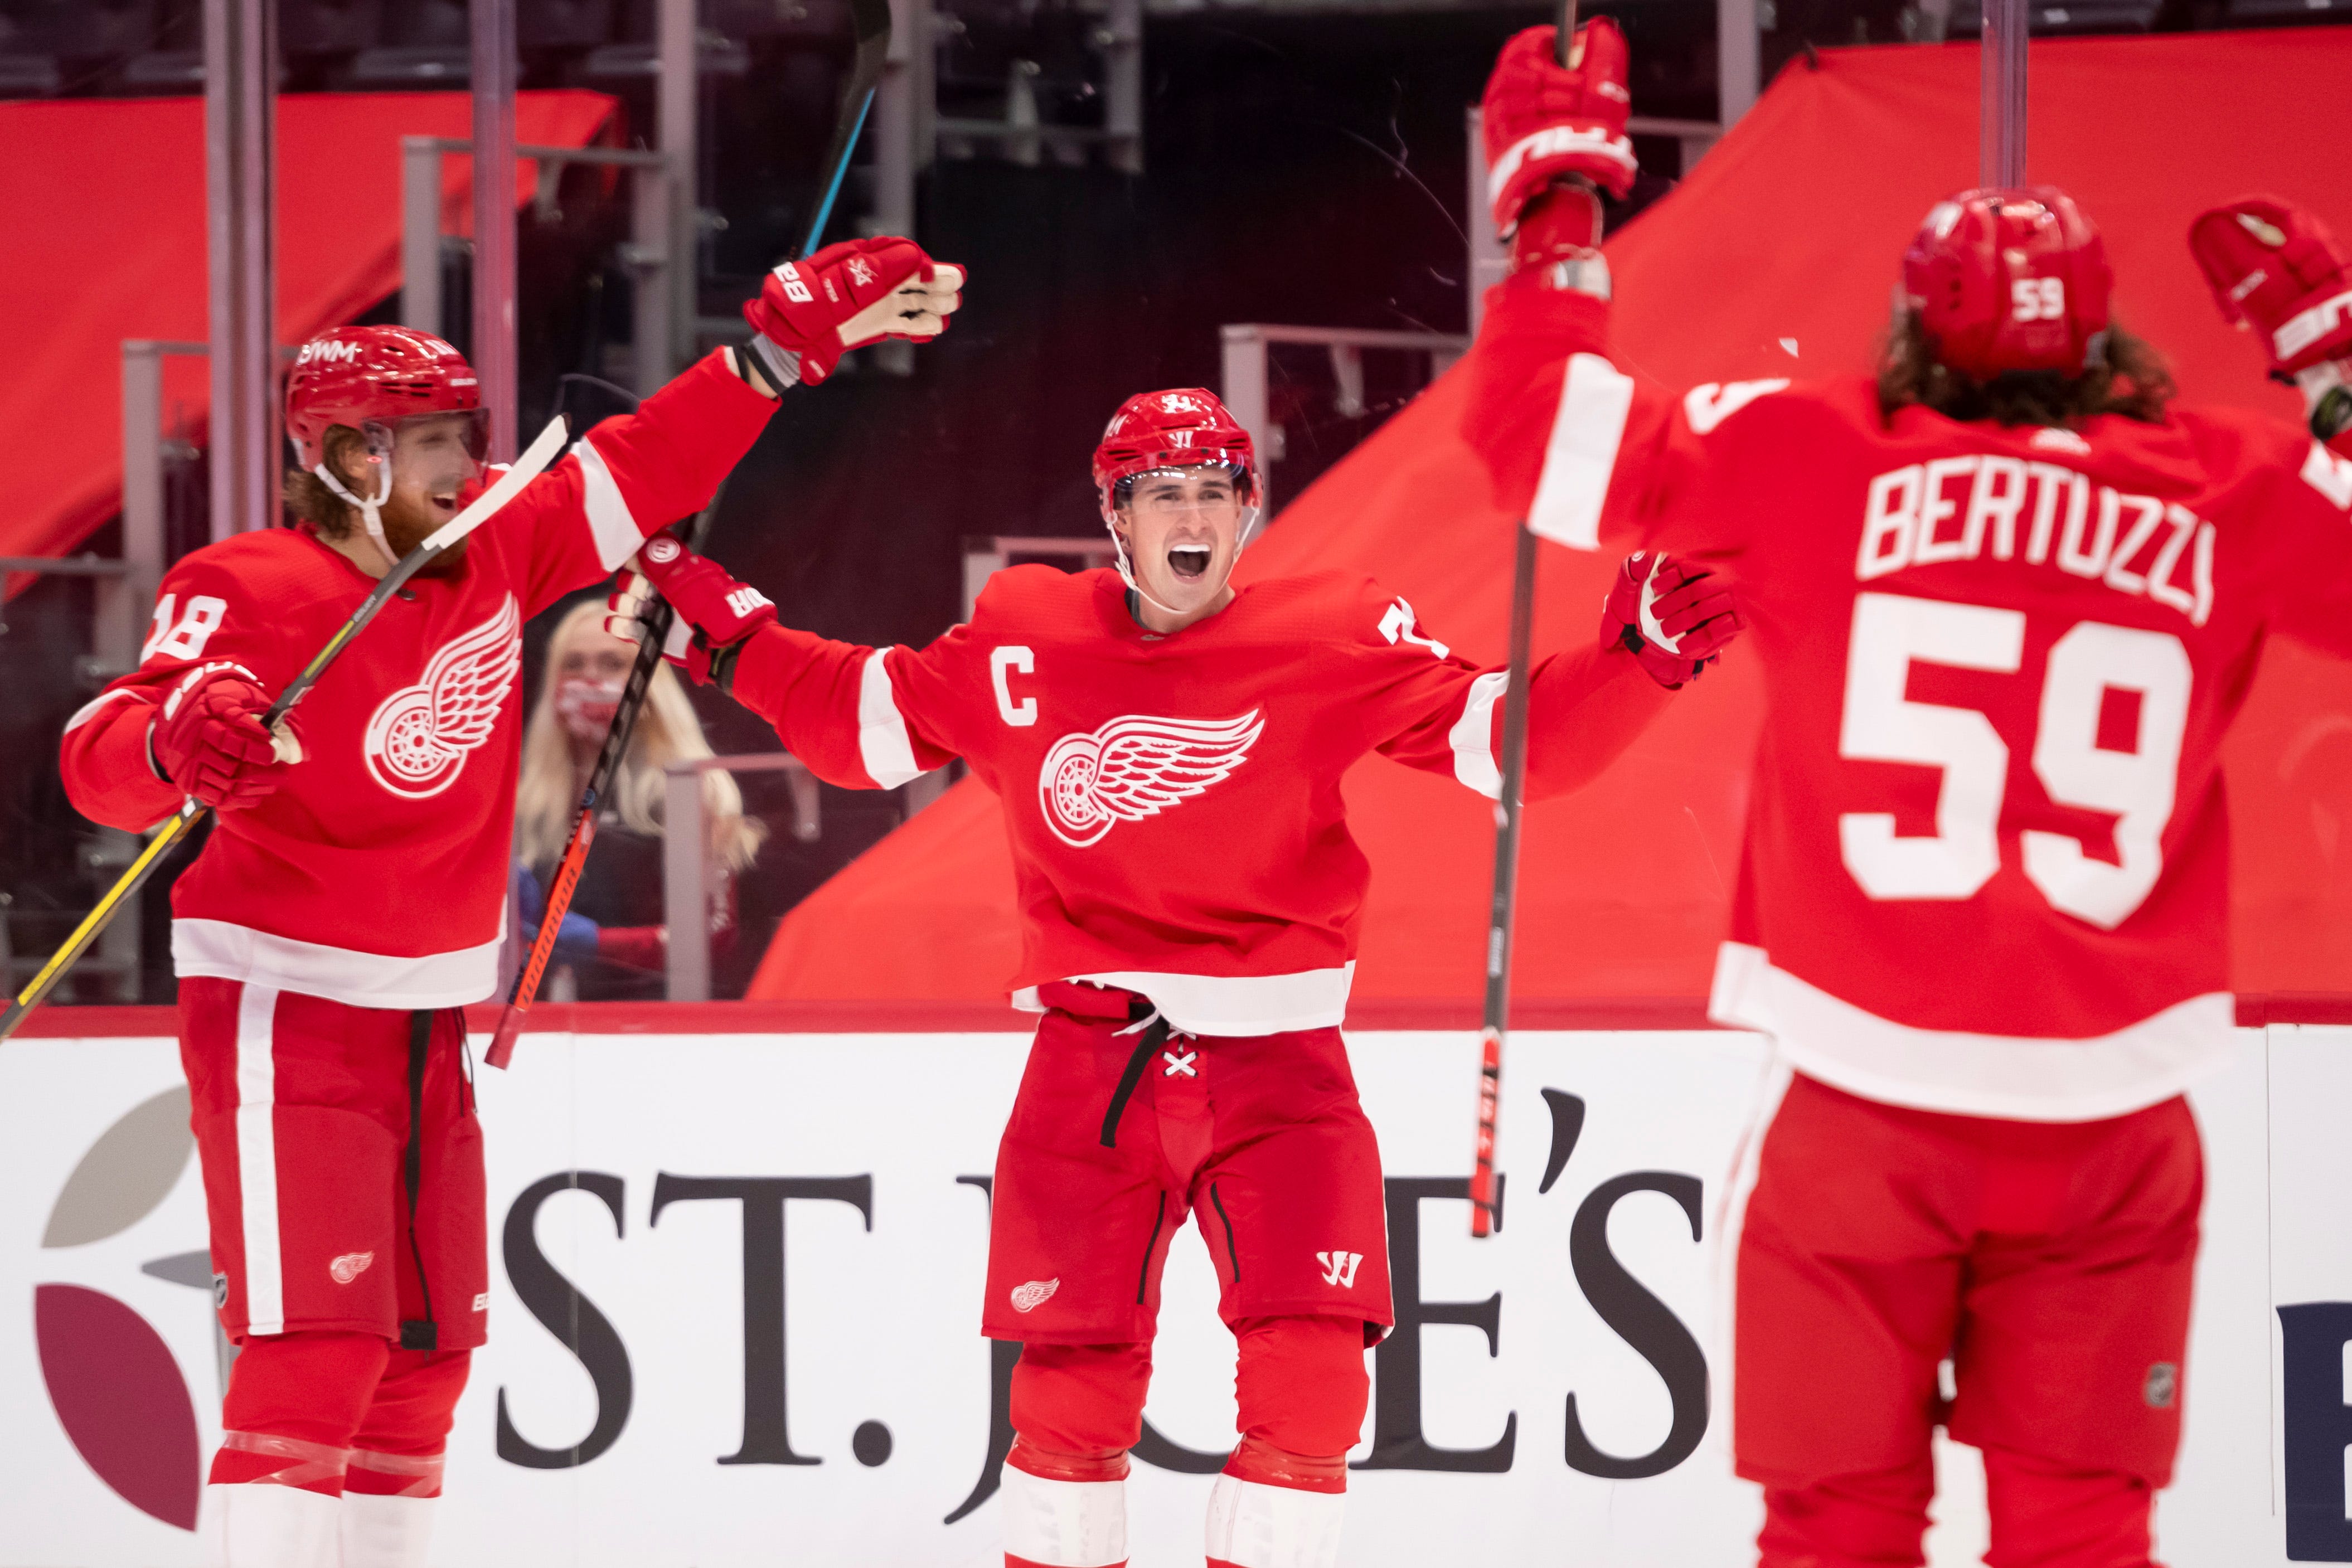 Detroit center Dylan Larkin, center, celebrates after scoring his first goal of the season in the third period during a game between the Detroit Red Wings and the Carolina Hurricanes.